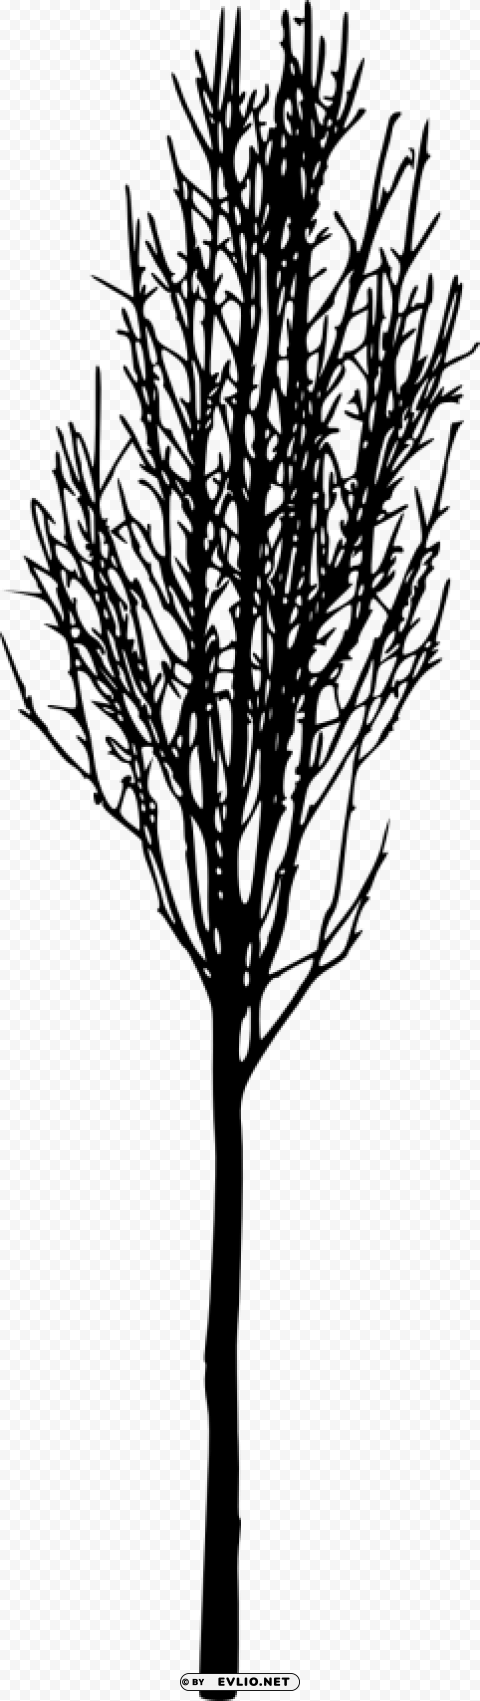 Transparent simple bare tree silhouette Isolated Artwork with Clear Background in PNG PNG Image - ID 50849cfb